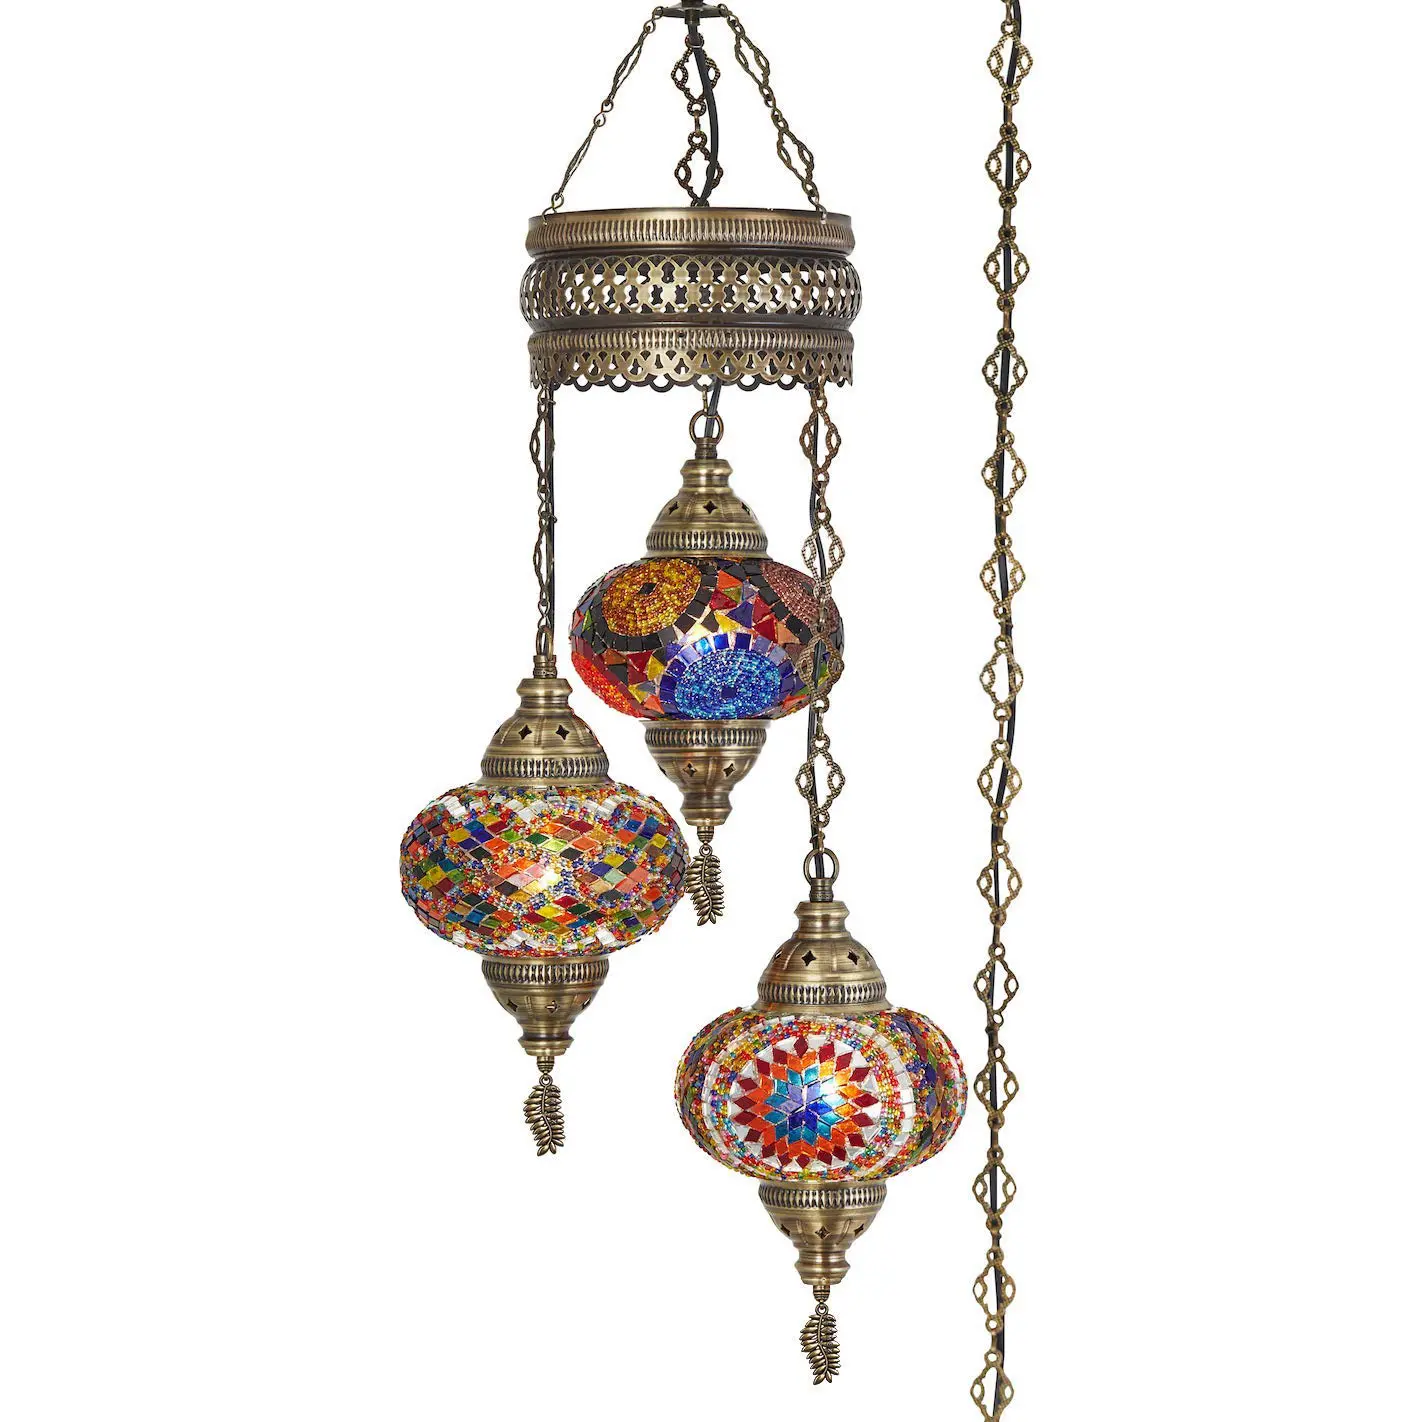 ceiling light Tiffany style chandelier Turkish Moroccan style mosaic chandelier with 15ft rope cable chain and 3 large globes